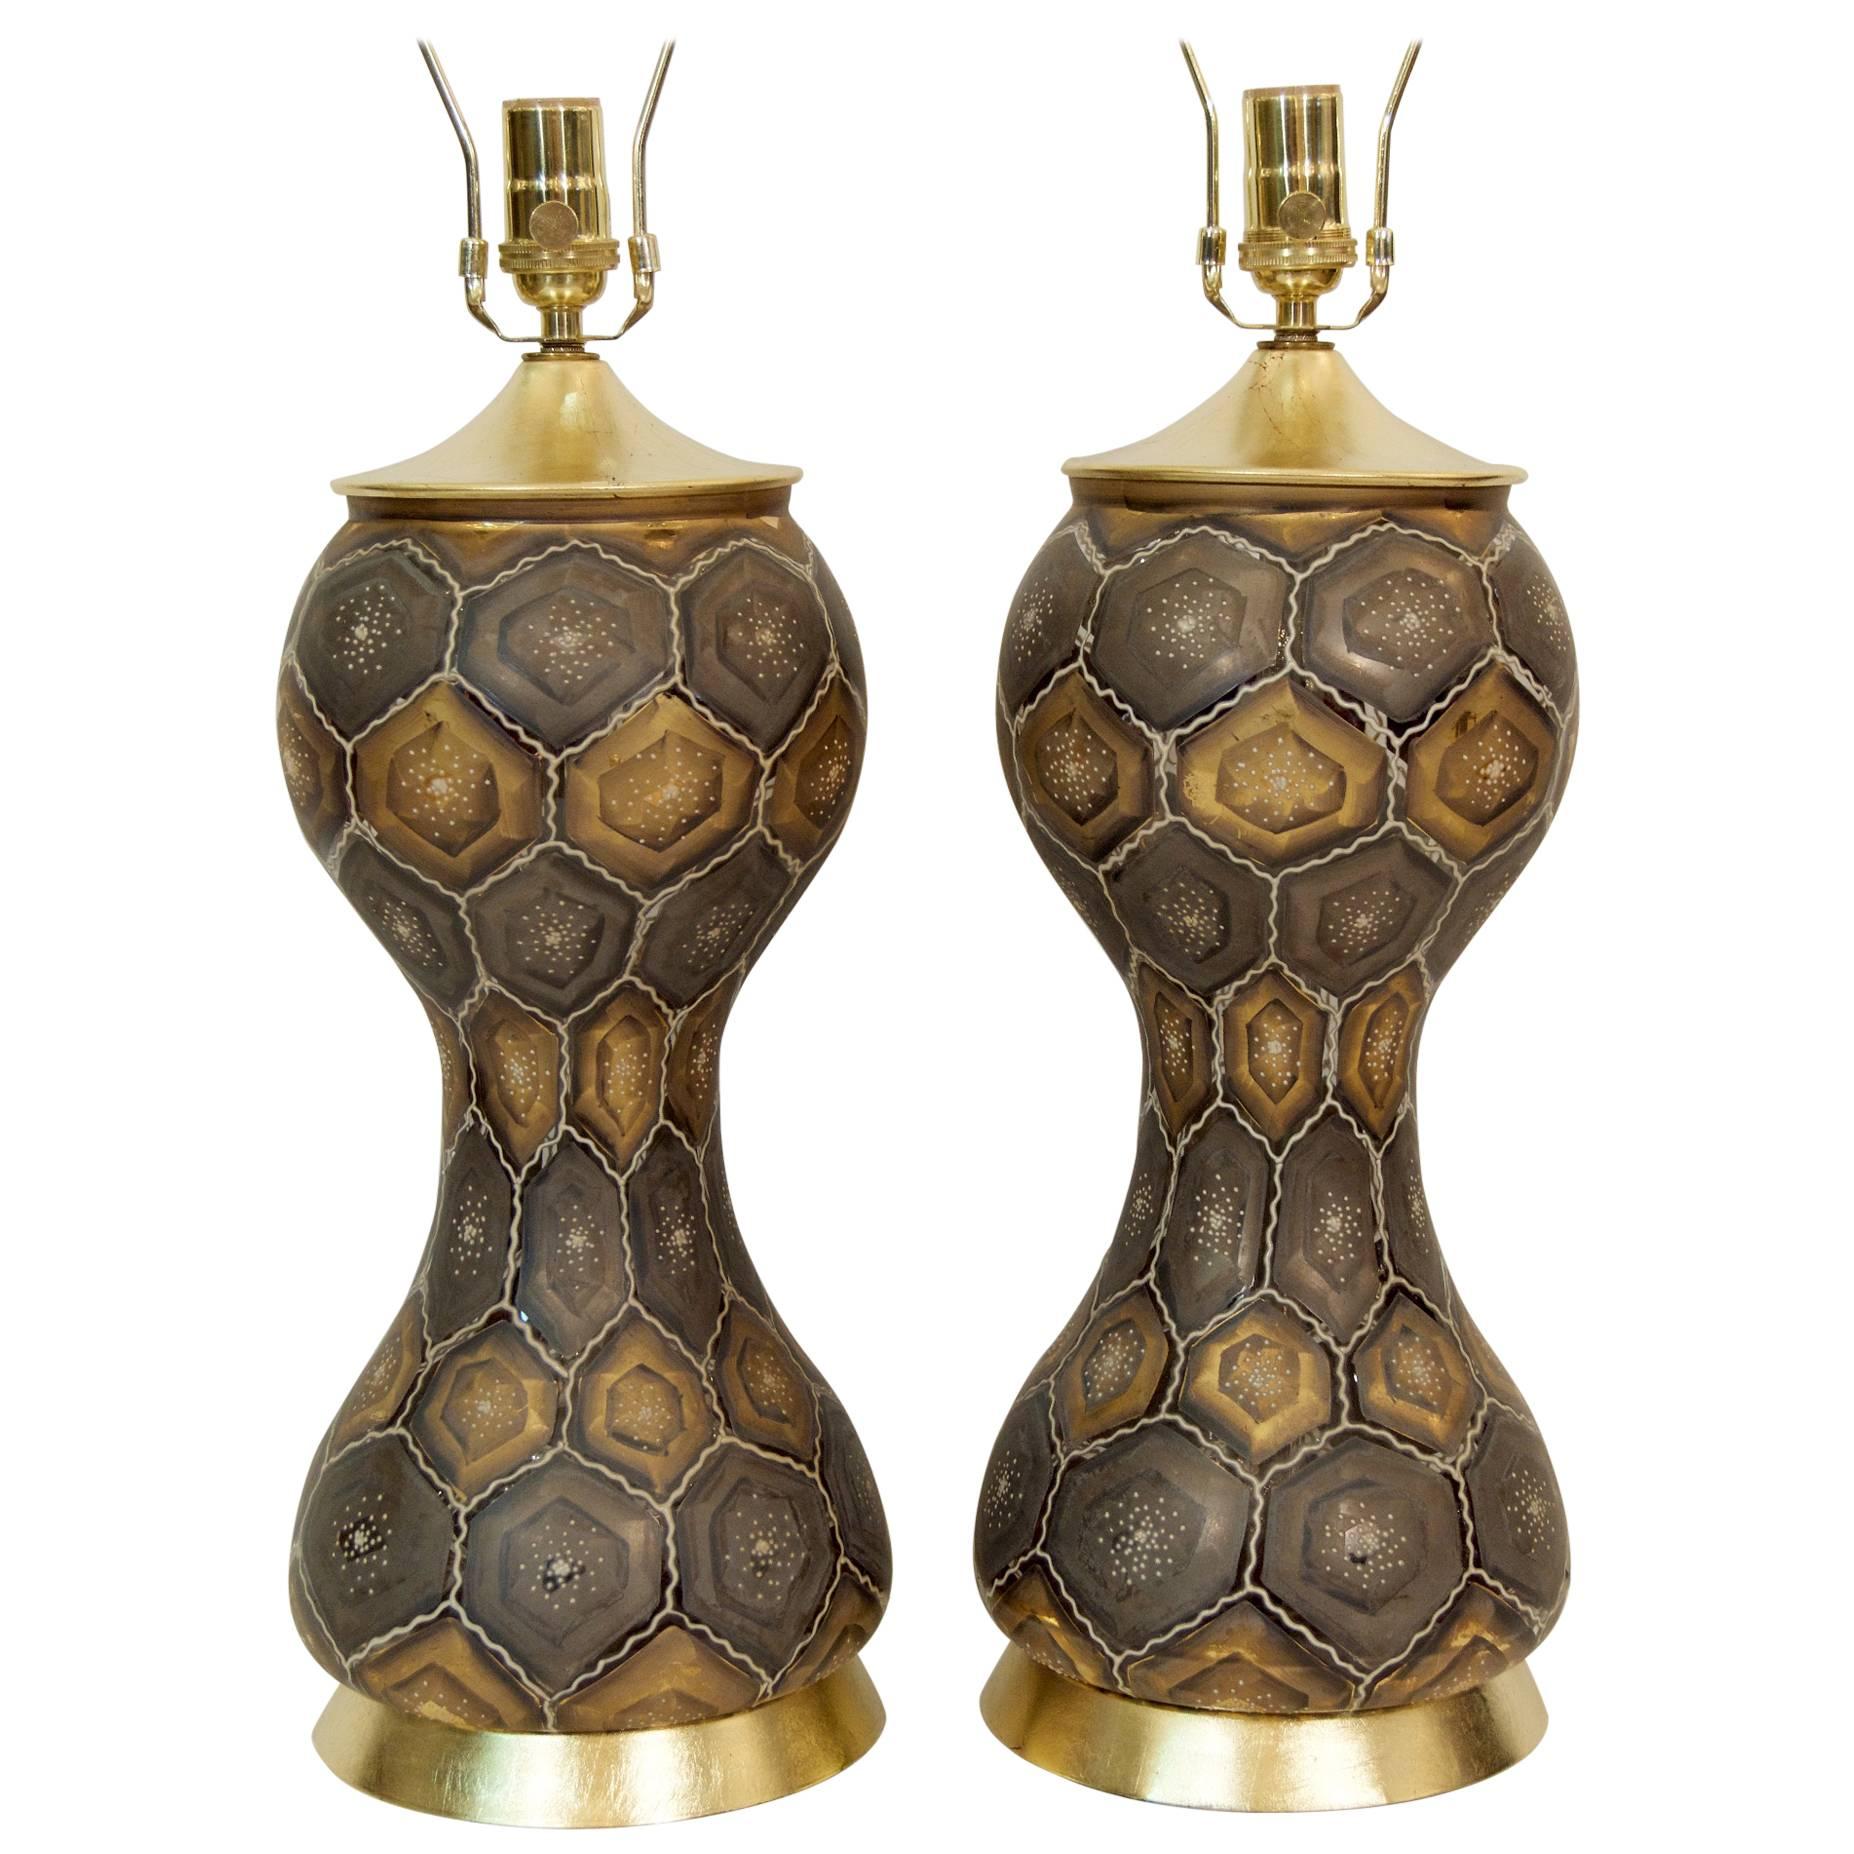 Pair of Moroccan Style Painted Glass Table Lamps with Gold Leaf Accents